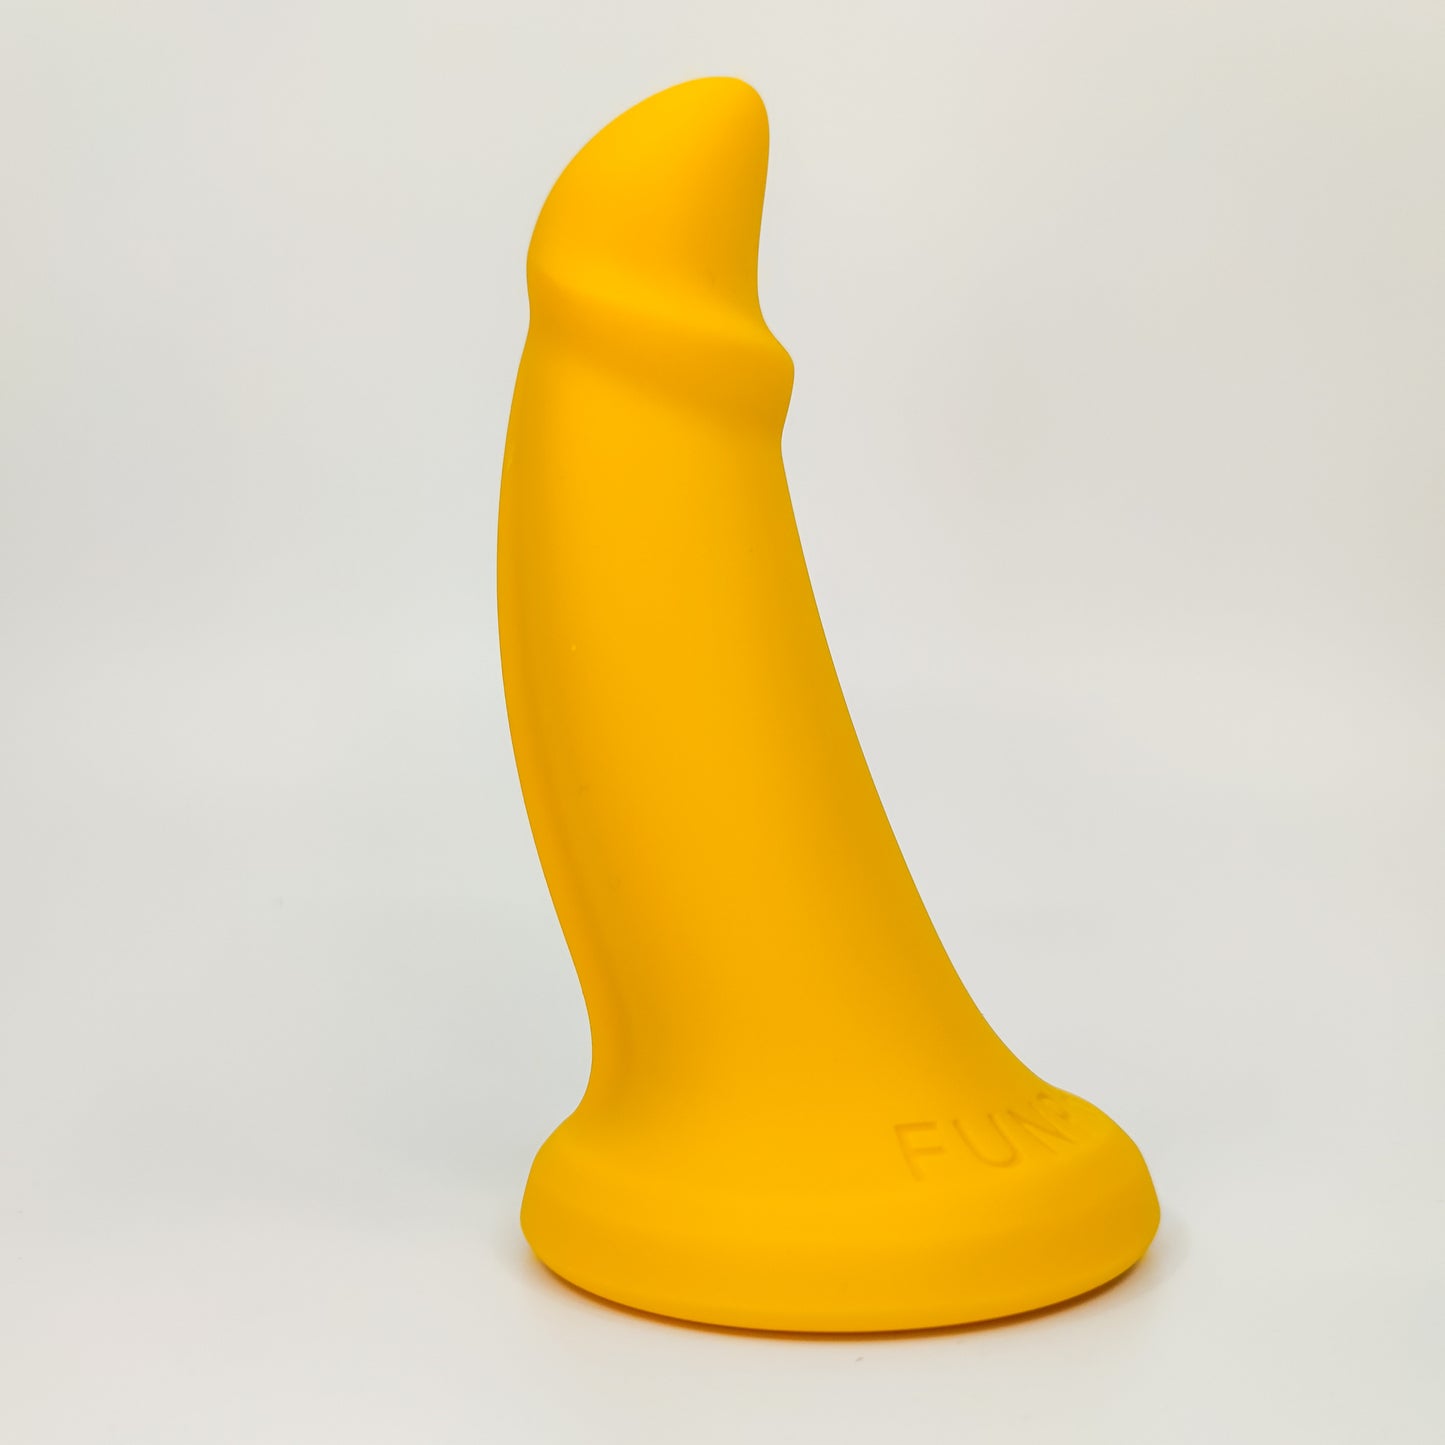 💛 New Small Dildo . ORION.  .: YELLOW :.  d👑